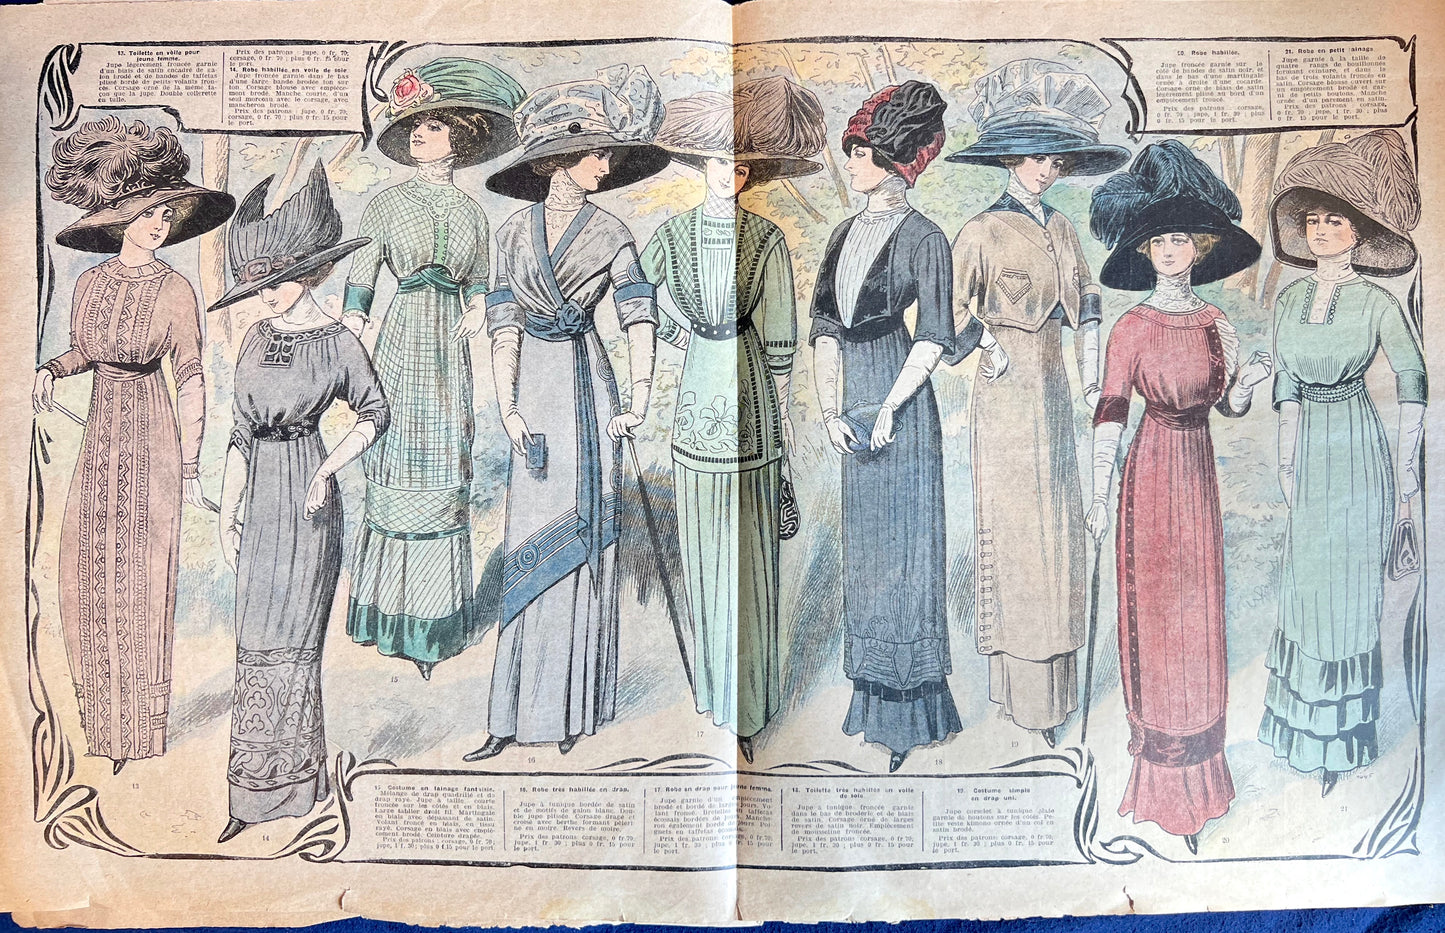 Fantastic Hats from over 100 years ago - October 1910 French Fashion Paper La Mode